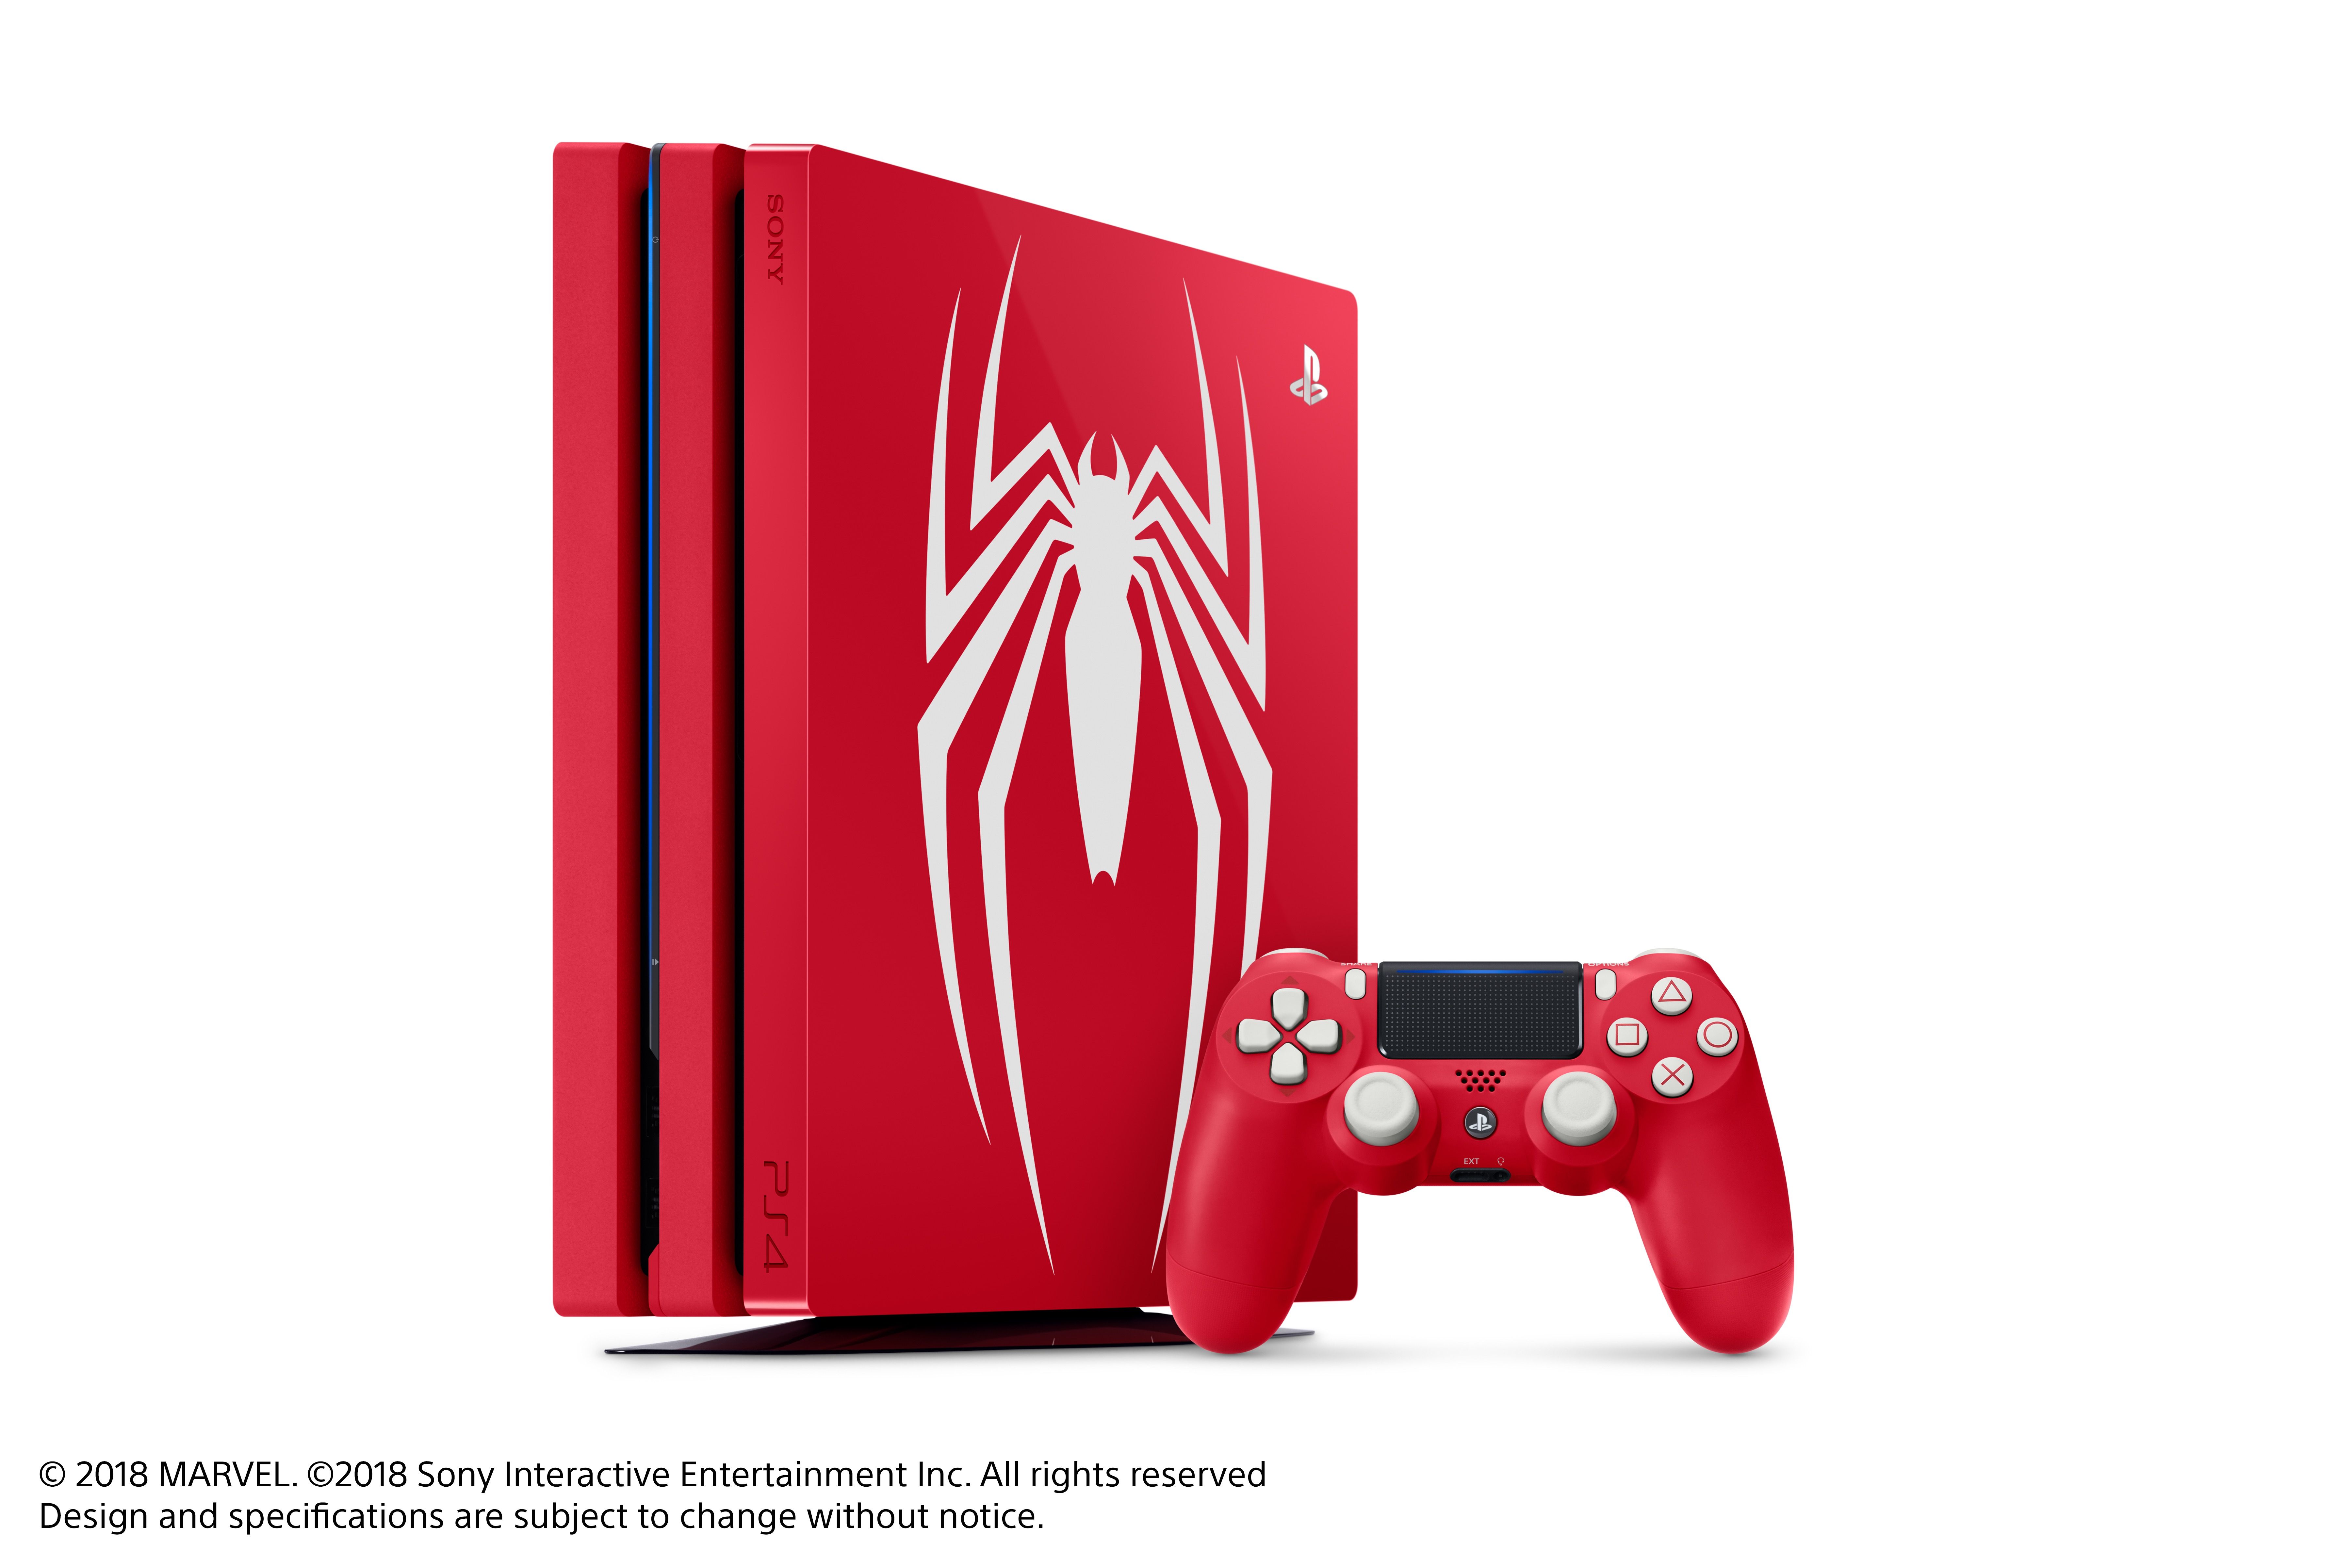 SpiderMan Special Edition PS4 and PS4 Pro Revealed